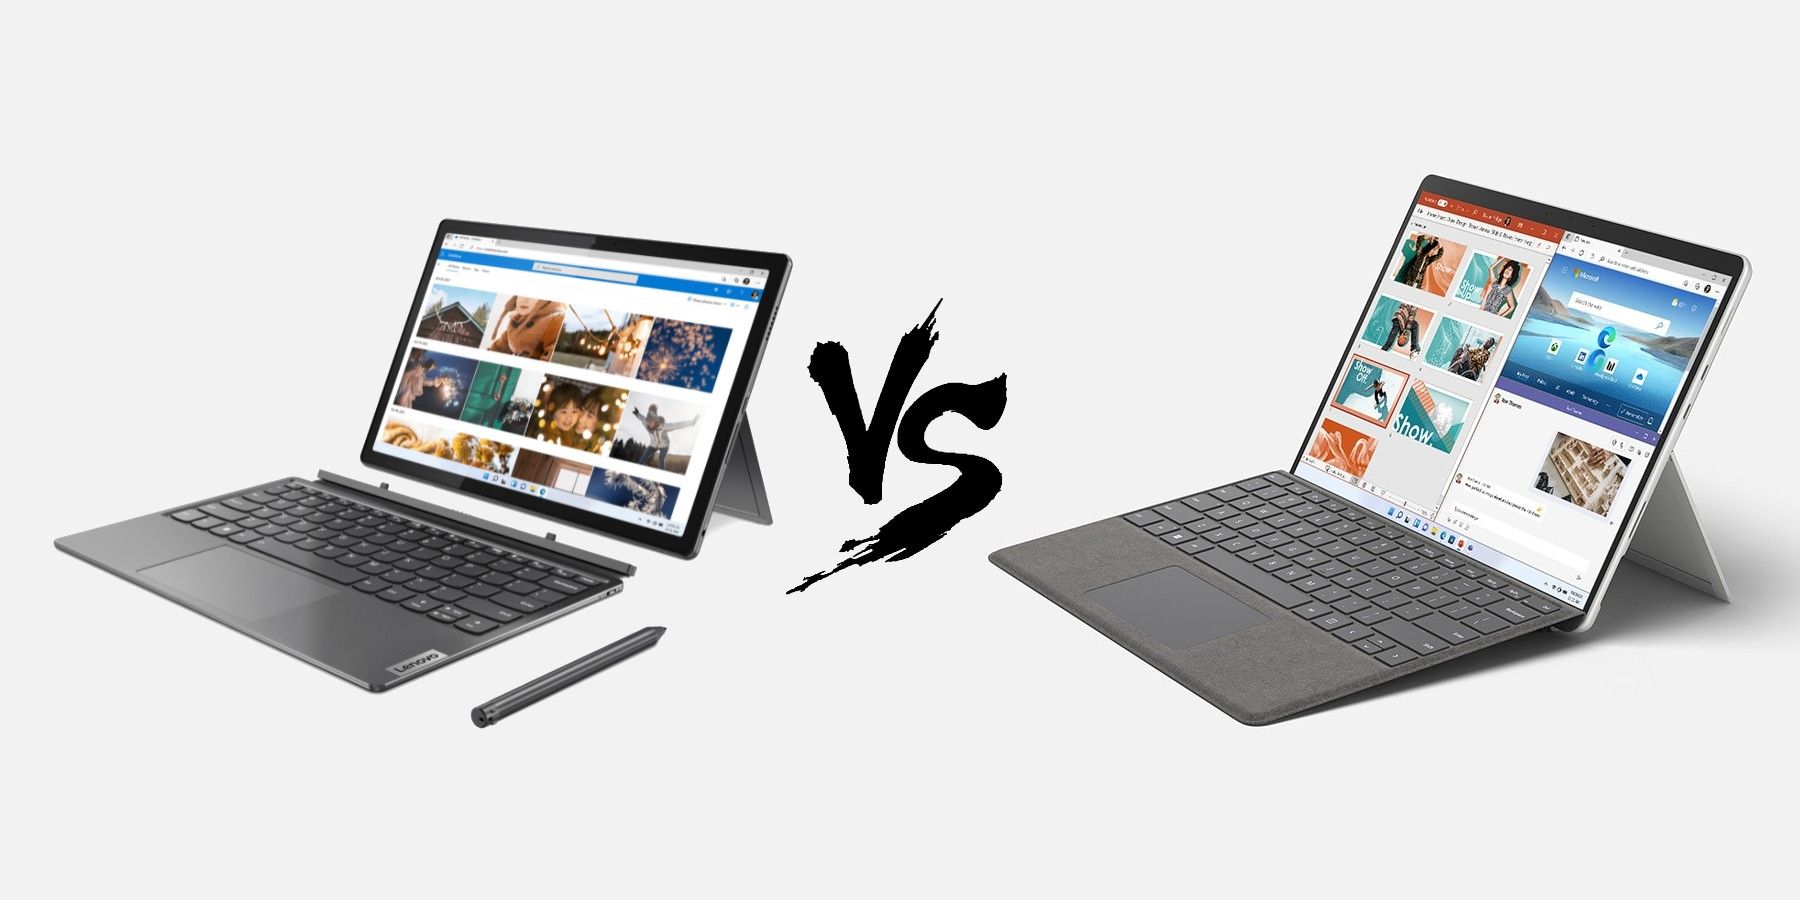 The IdeaPad Duet 5i and Surface Pro 8 are detachable 2-in-1 Windows laptops